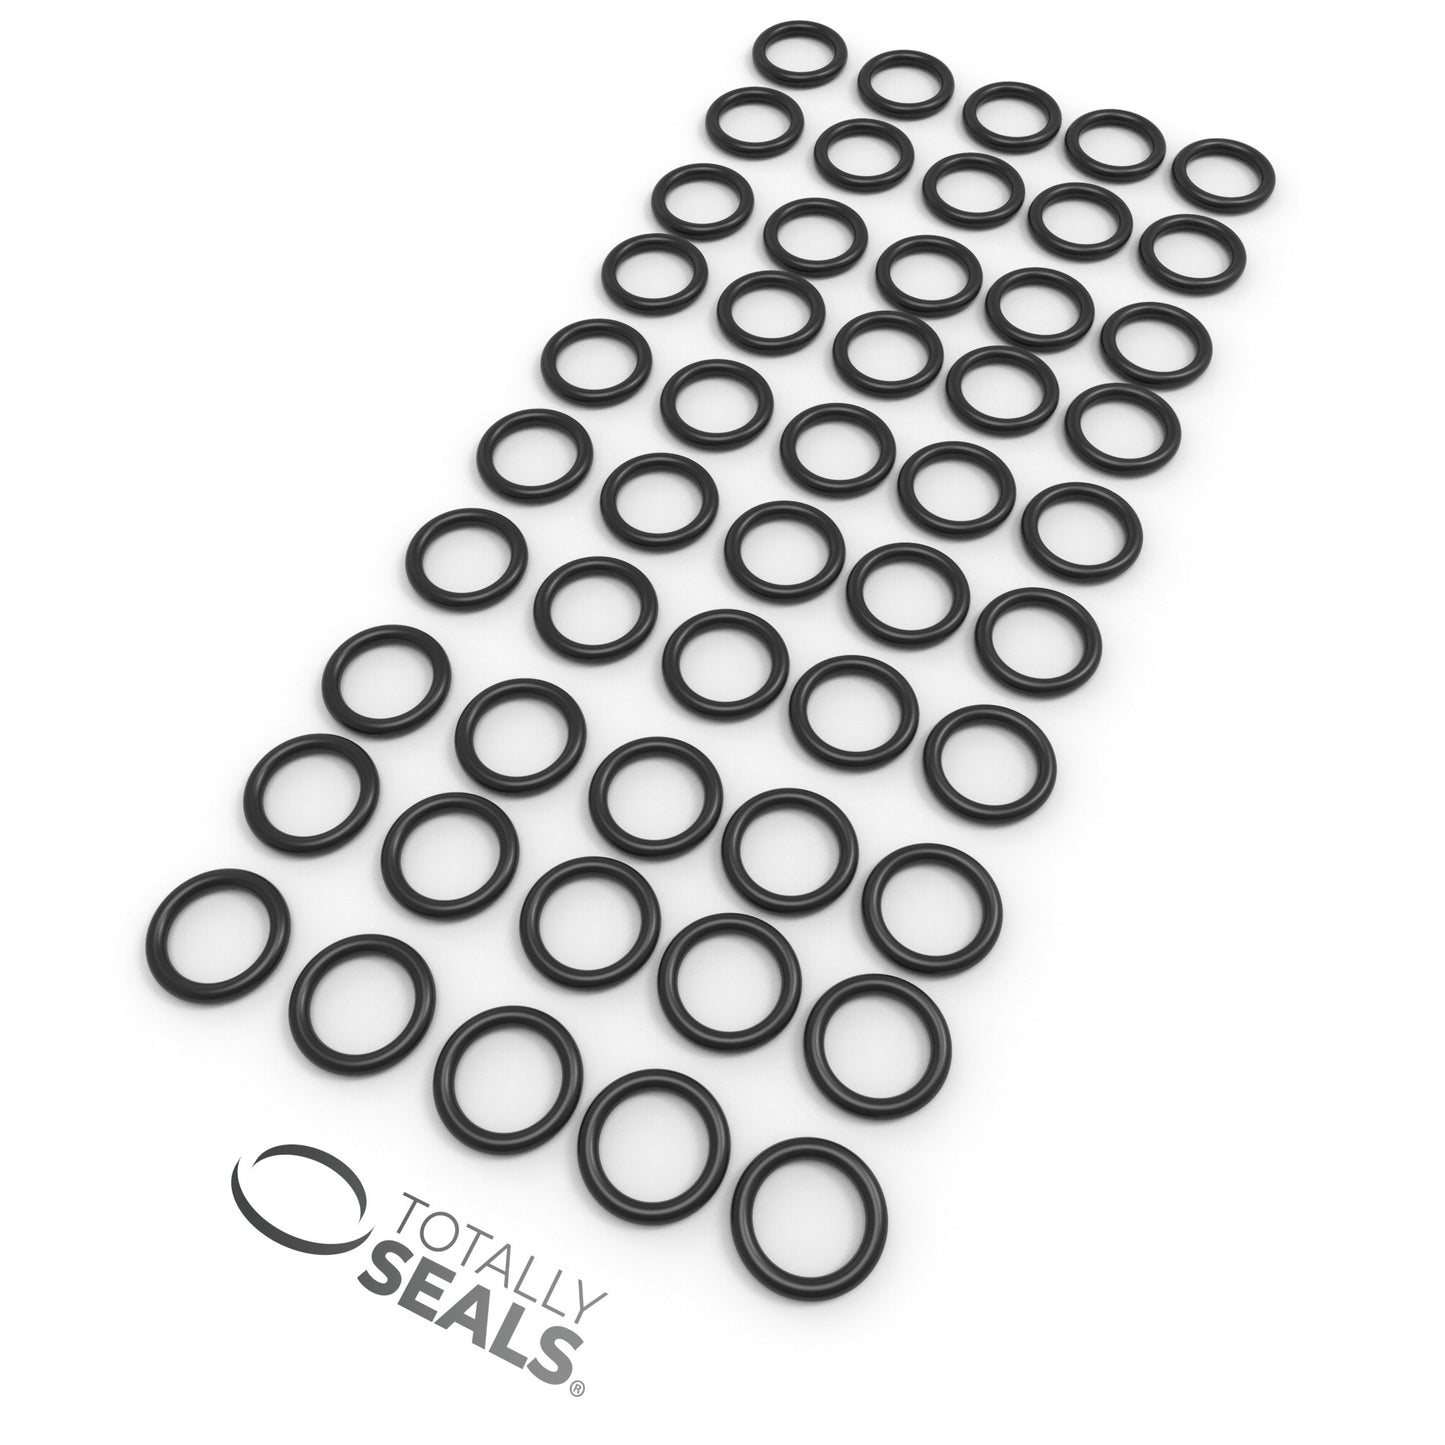 35mm x 3mm (41mm OD) Nitrile O-Rings - Totally Seals®